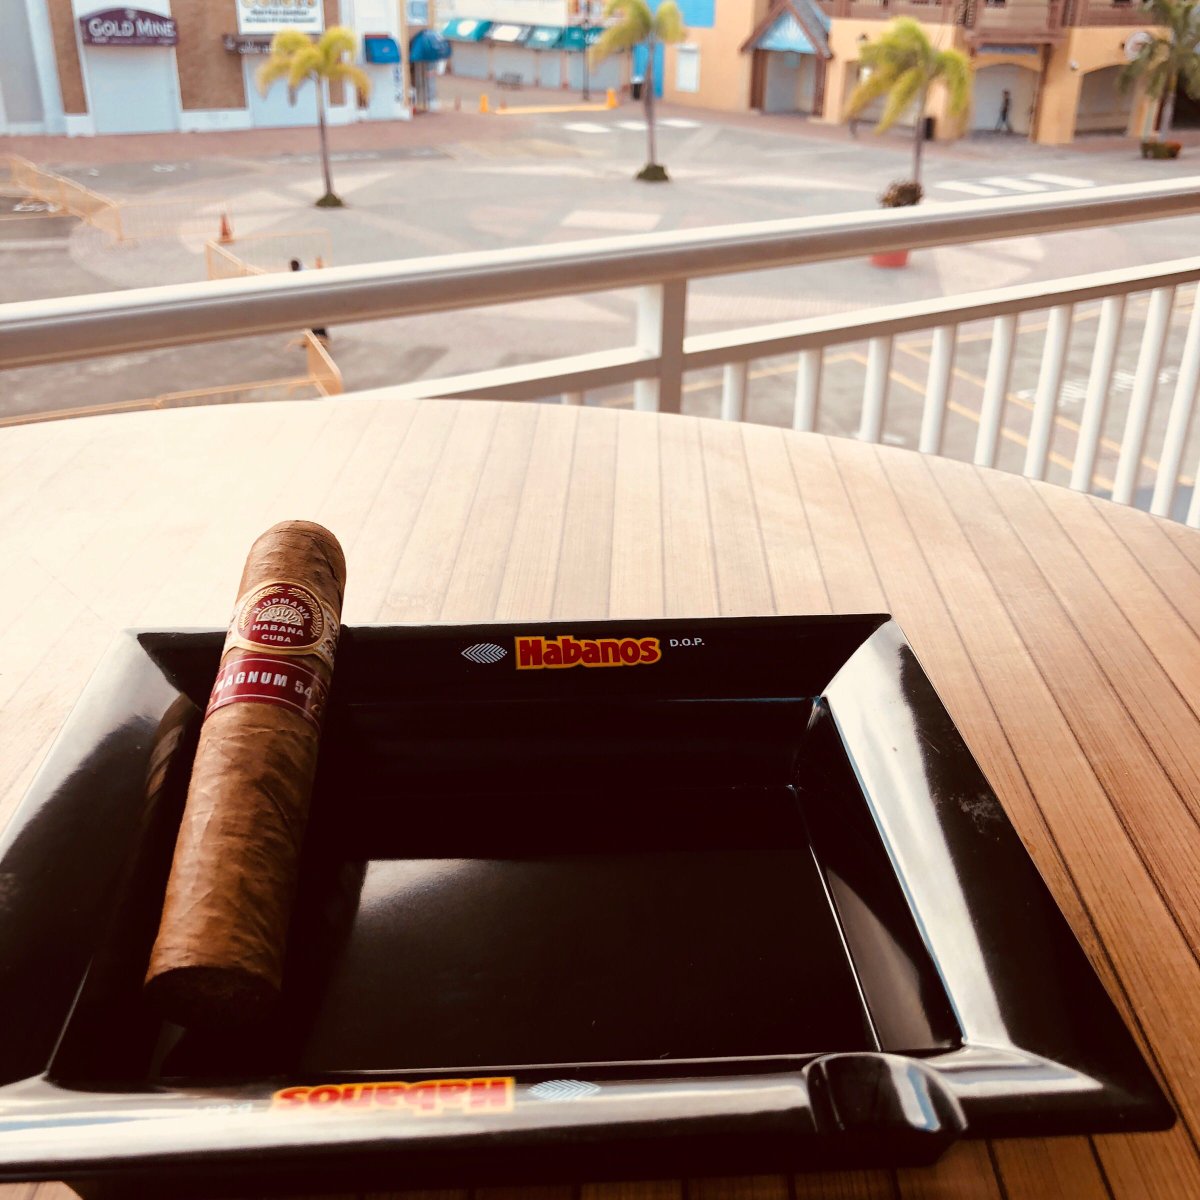 Welcome to the good life; your favorite cigar with a view. 
.
.
.
#lcdh #lcdhstkitts #lacasadelhabano #cubancigars #cigarlovers #islandlife #habanos #cigarcollection #cigars #humidor